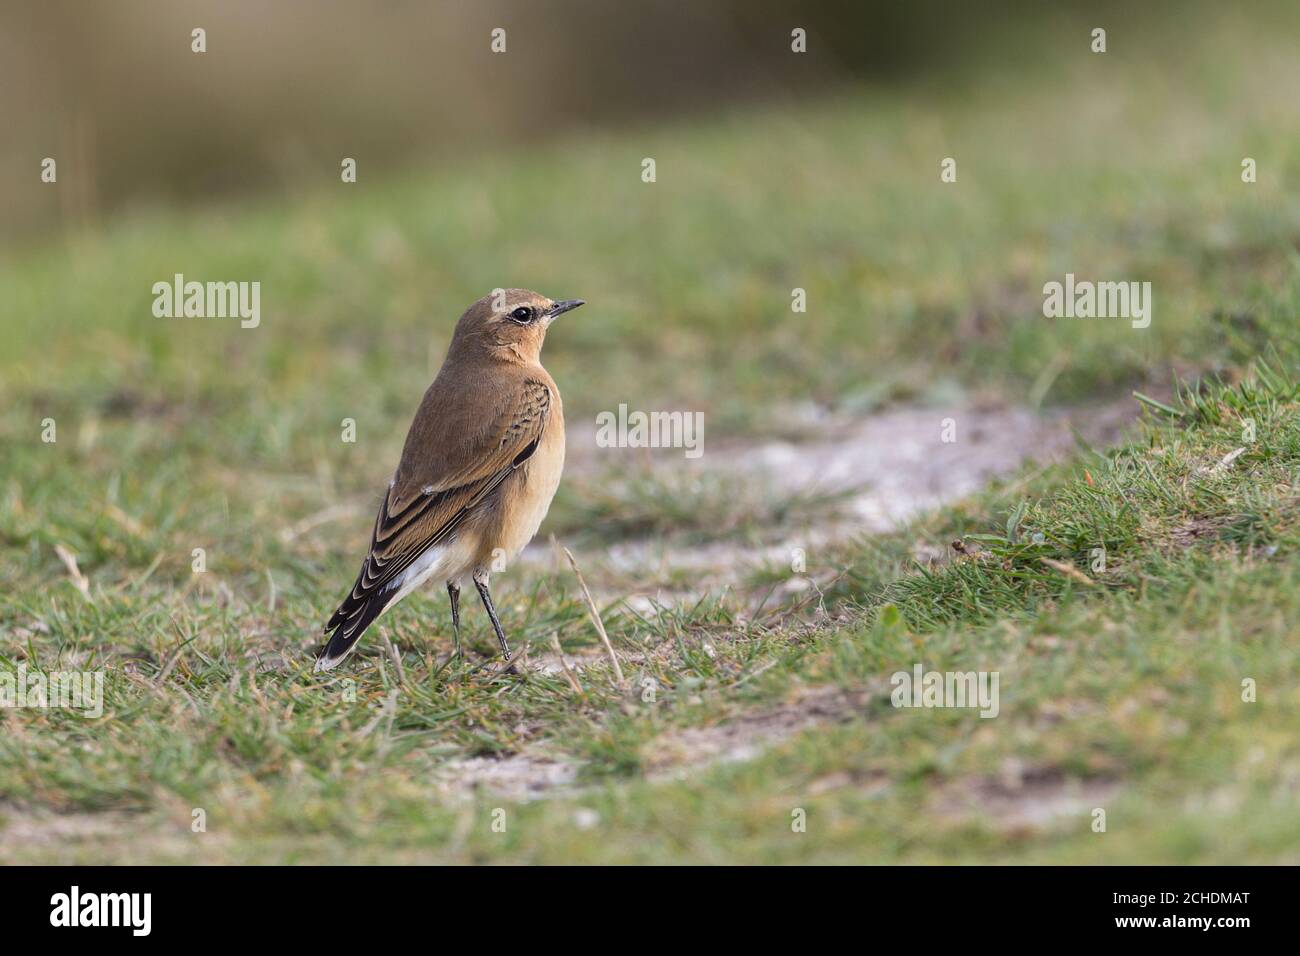 Wheatear Oenanthe oenanthe female migrant to UK sandy brown plumage black and white tail feathers pale stripe over eye wheat shape patch behind eye Stock Photo